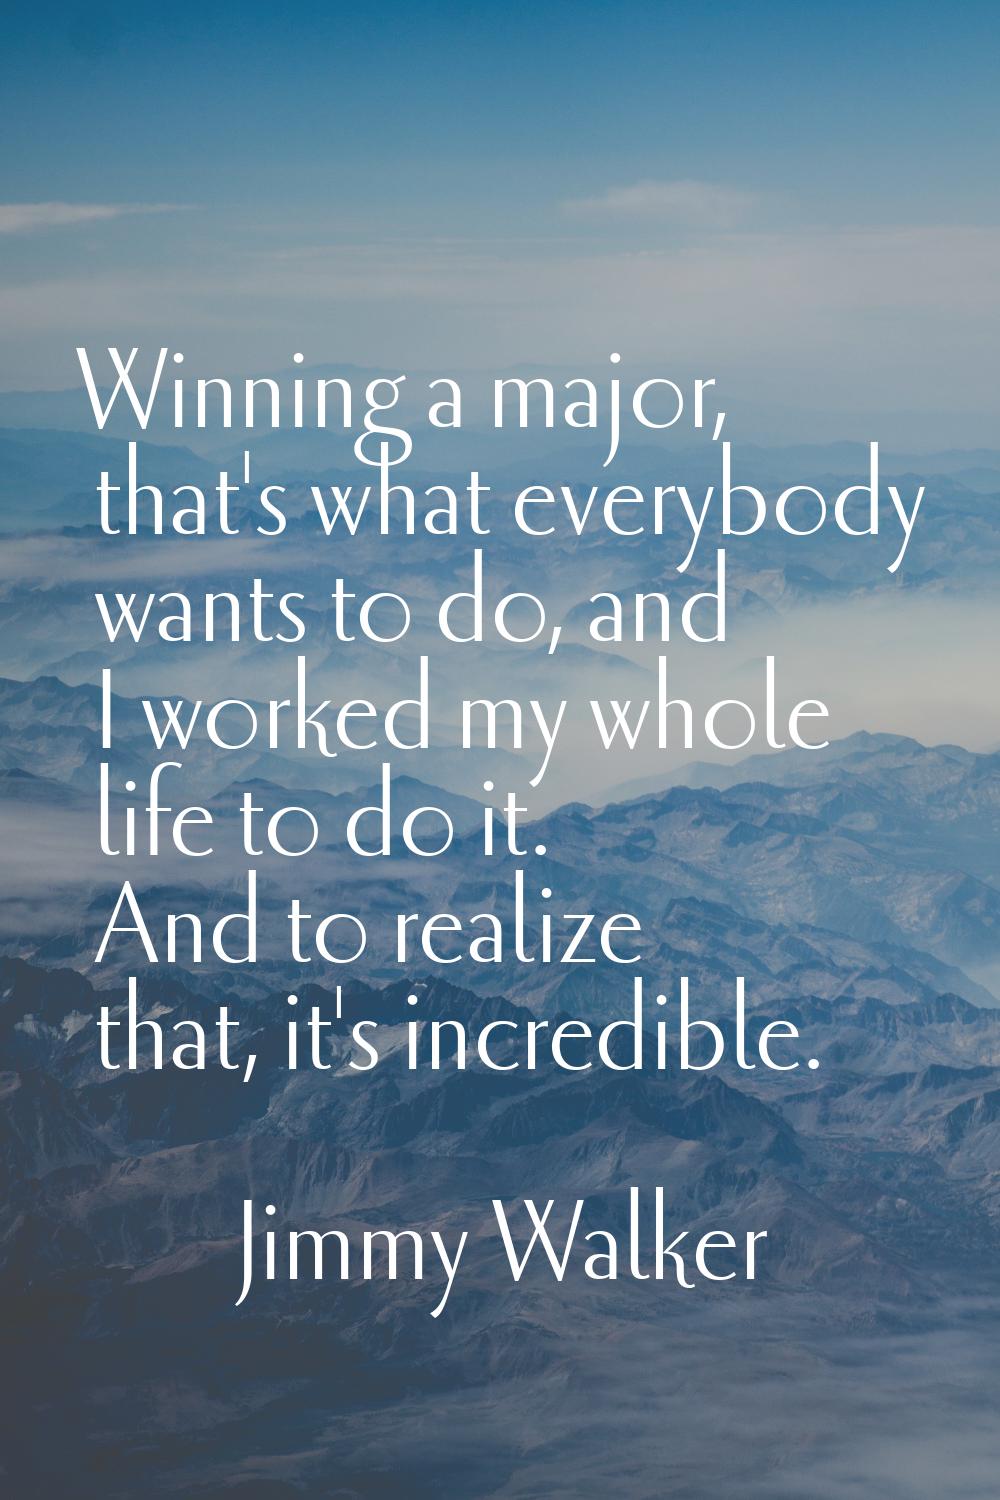 Winning a major, that's what everybody wants to do, and I worked my whole life to do it. And to rea